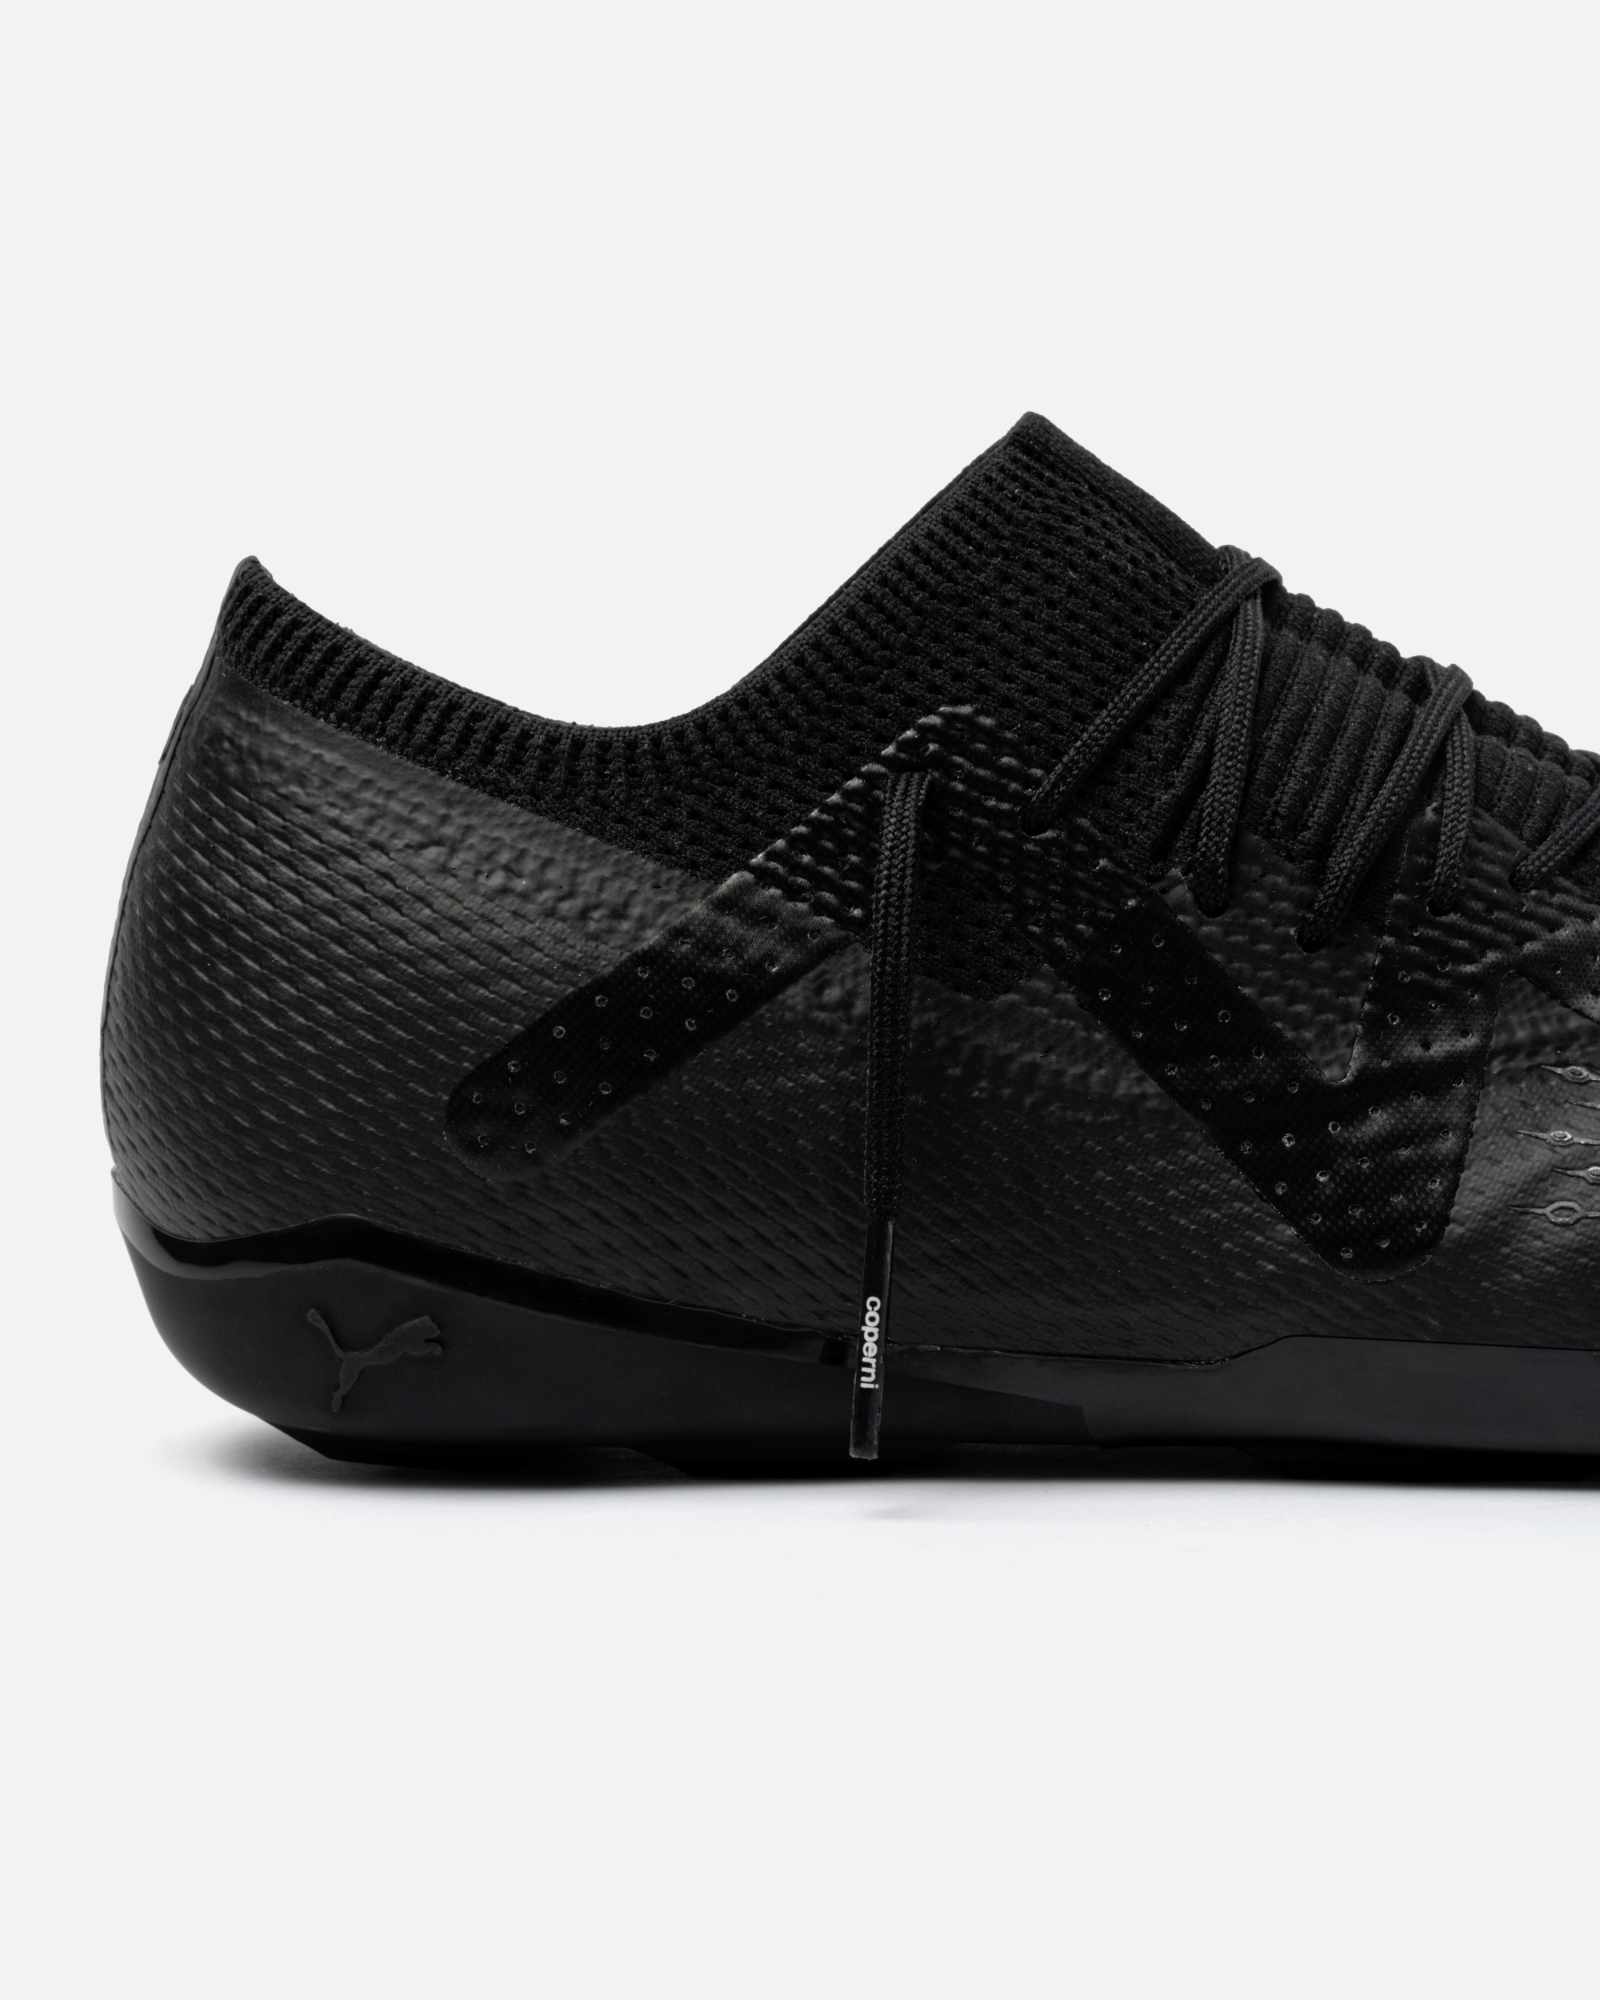 Product photos of Coperni & PUMA's collaborative sneaker in black, white and yellow colorways